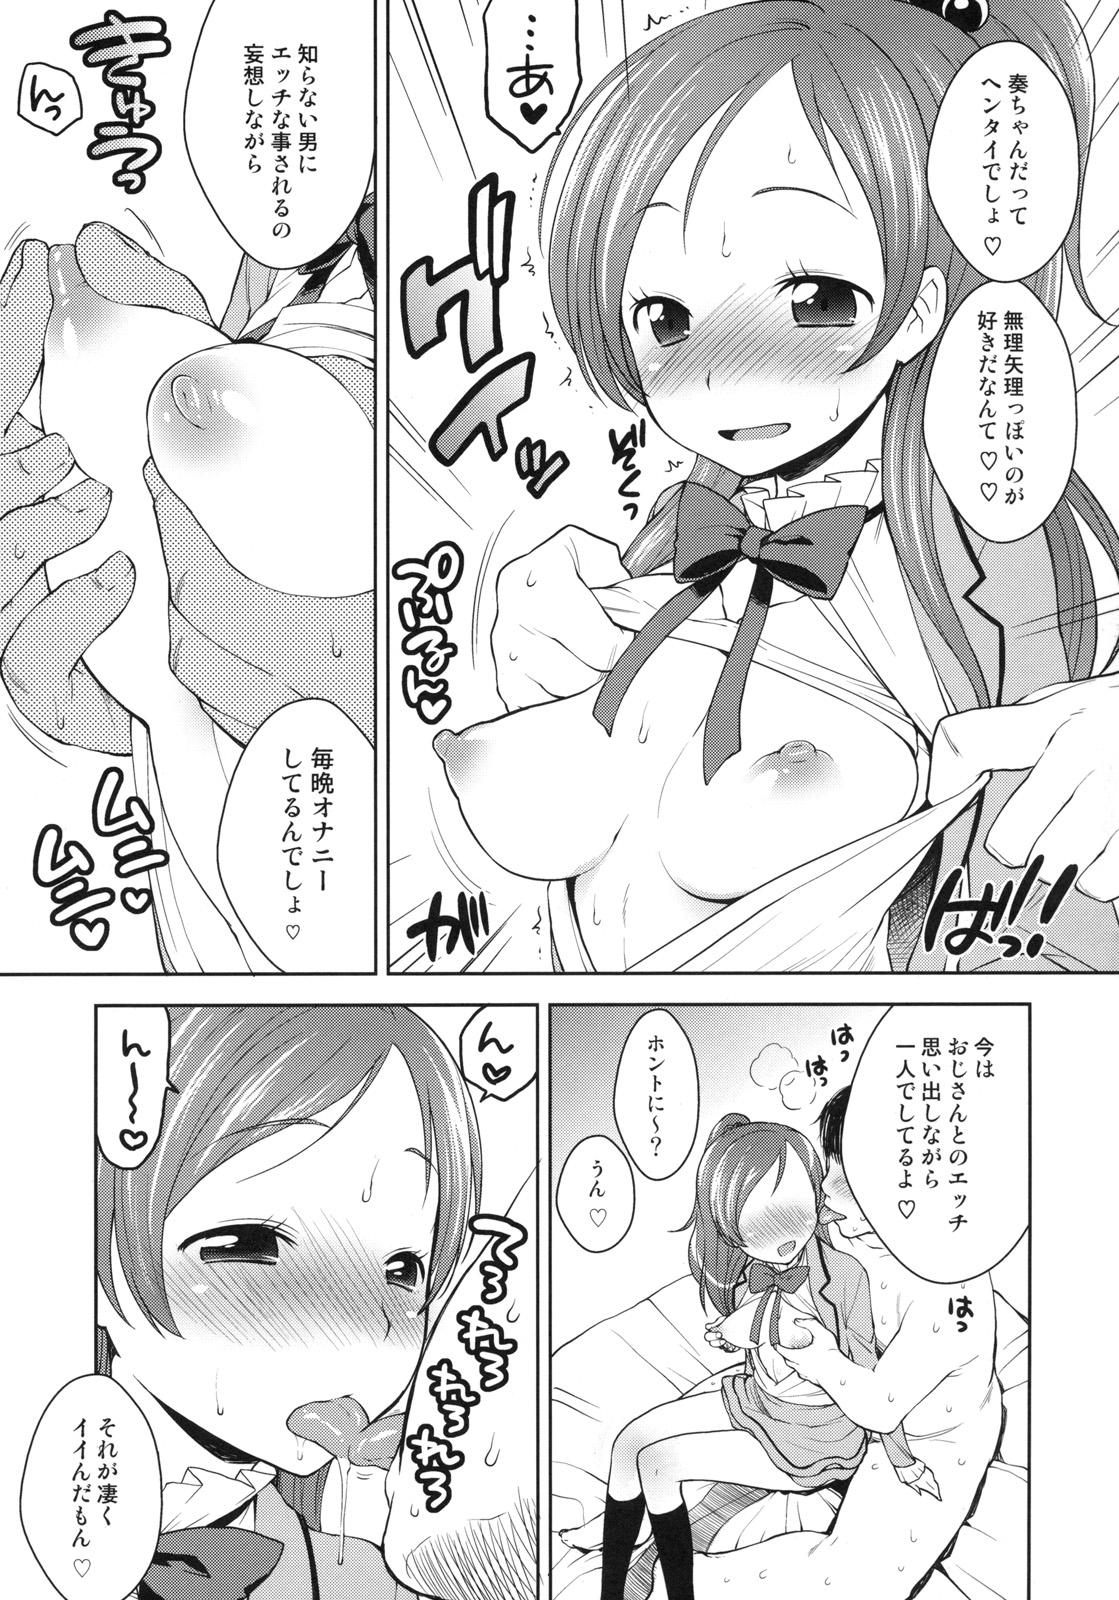 Gaystraight Sweet Delivery - Suite precure Nena - Page 4